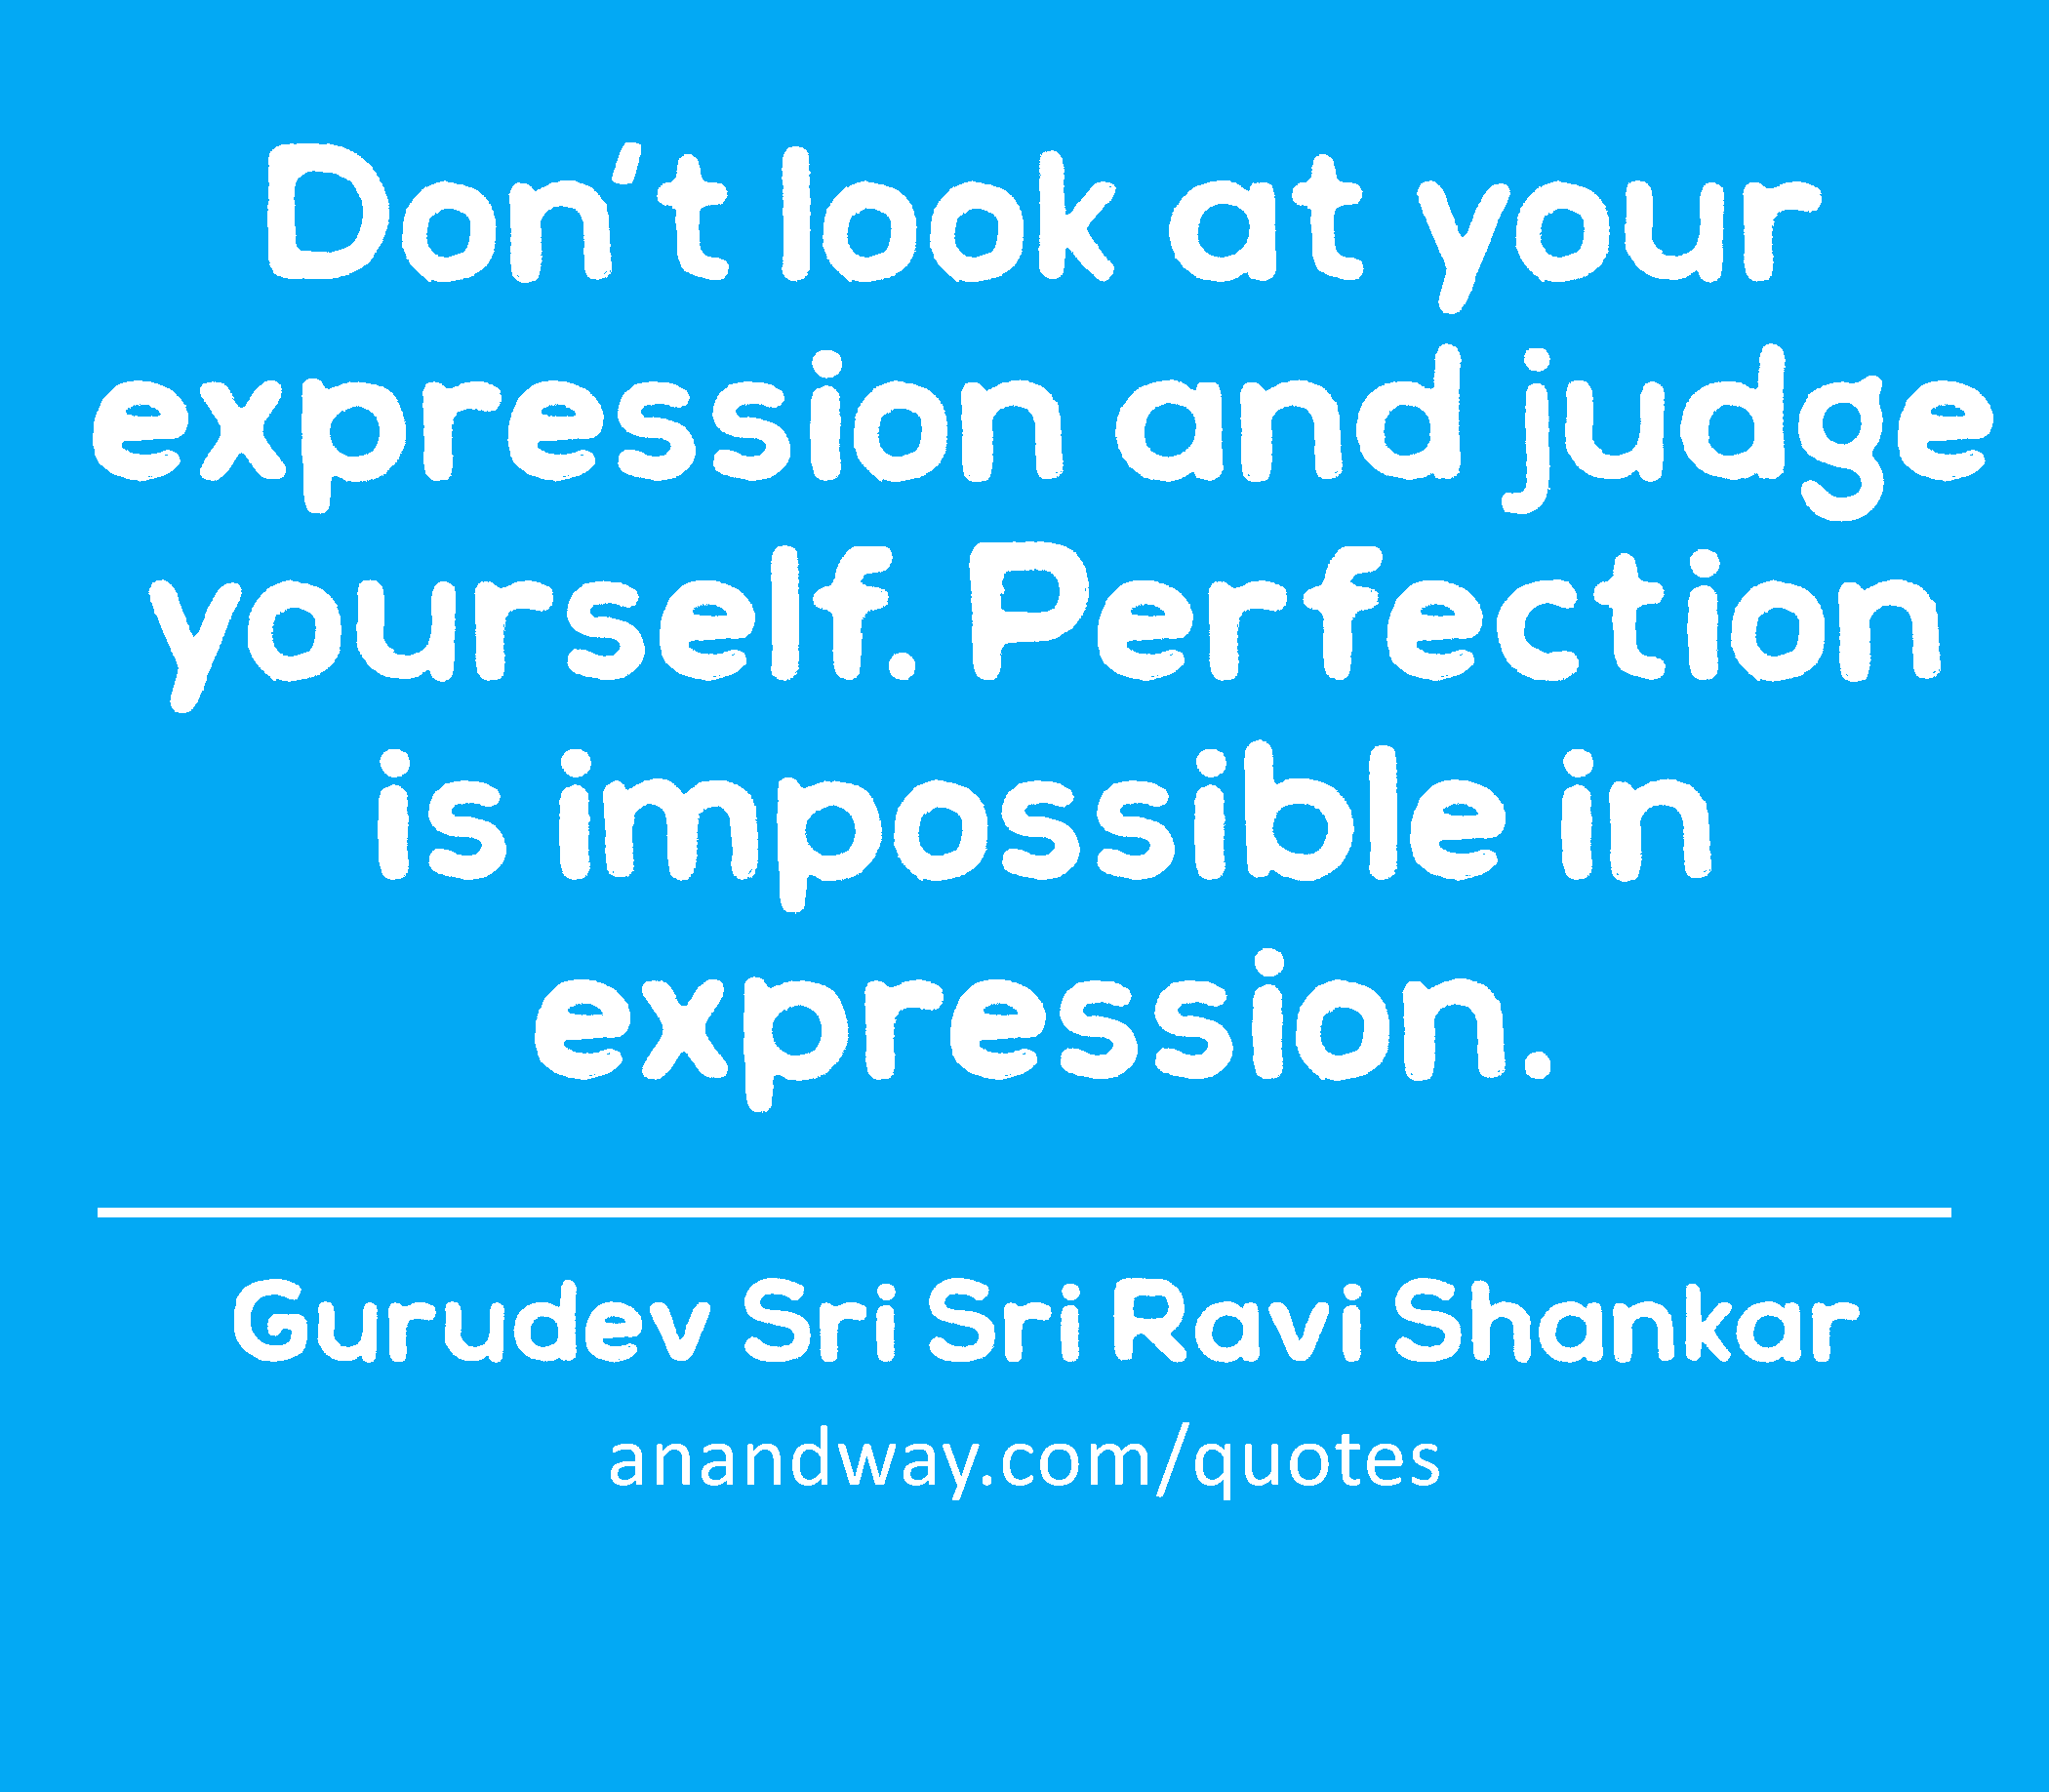 Don't look at your expression and judge yourself. Perfection is impossible in expression. 
 -Gurudev Sri Sri Ravi Shankar